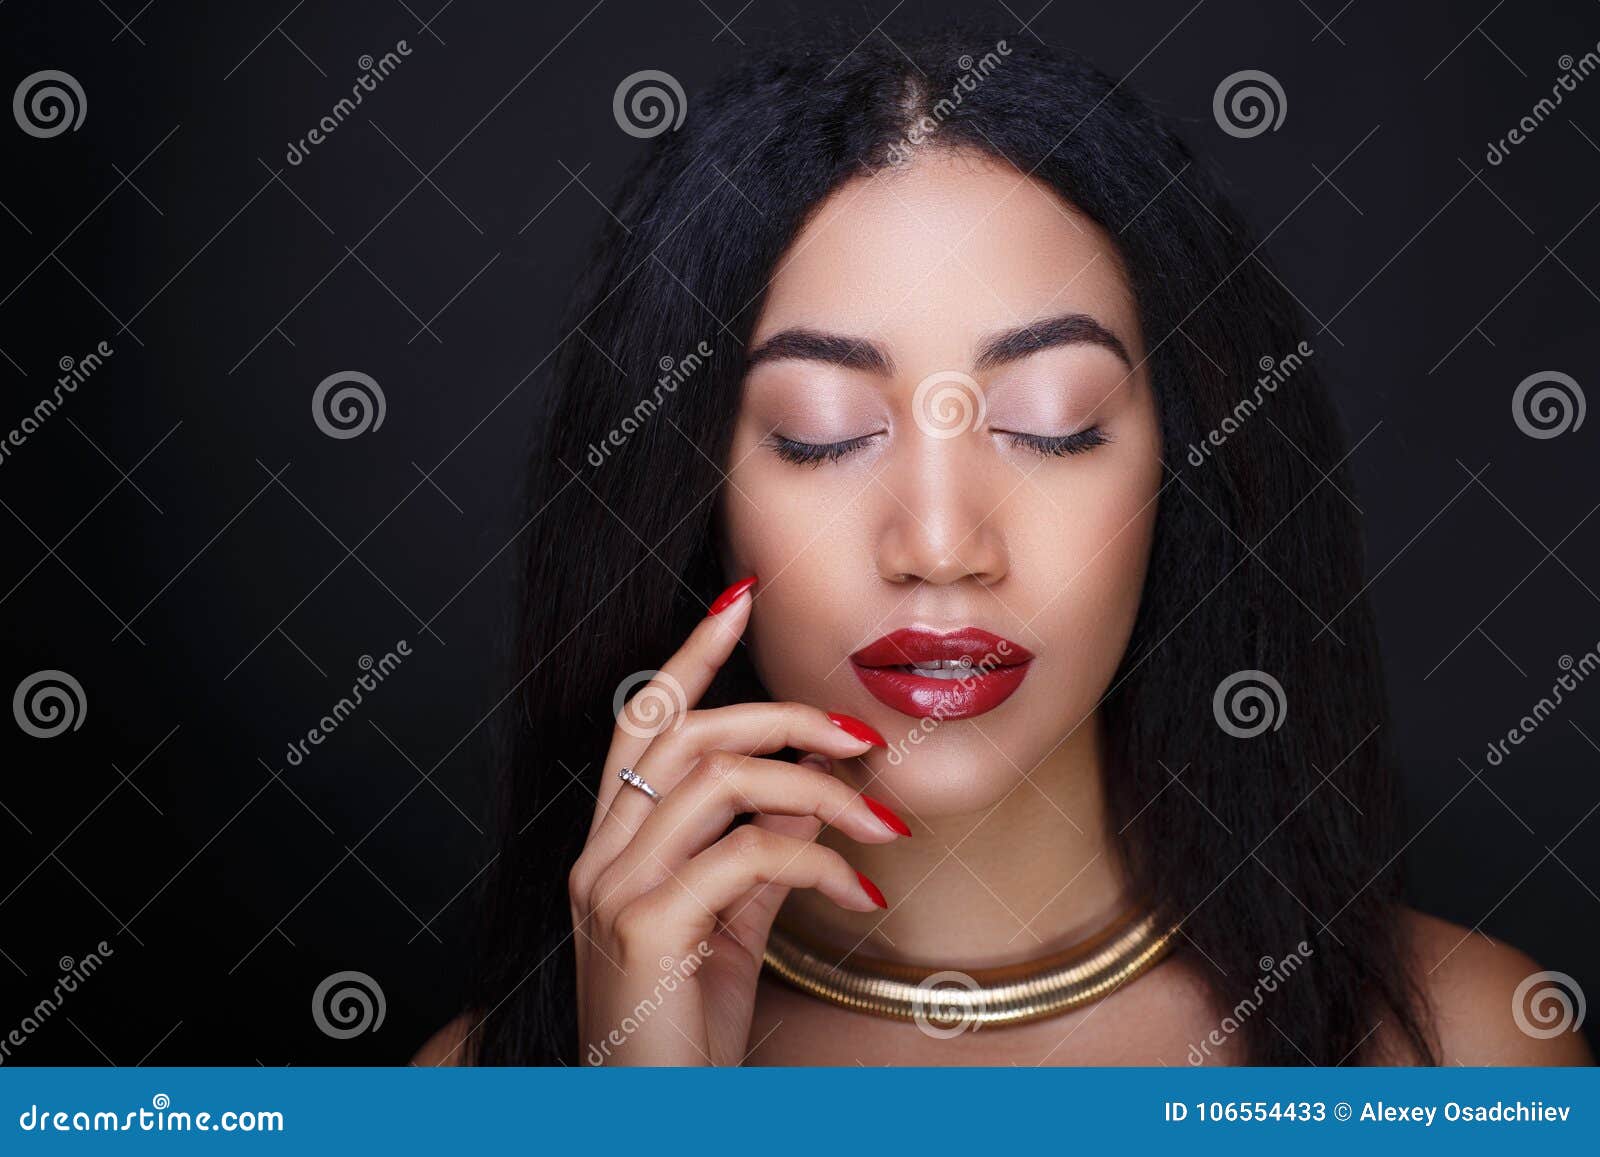 Woman Red Lips Stock Image Image Of Attractive Beauty